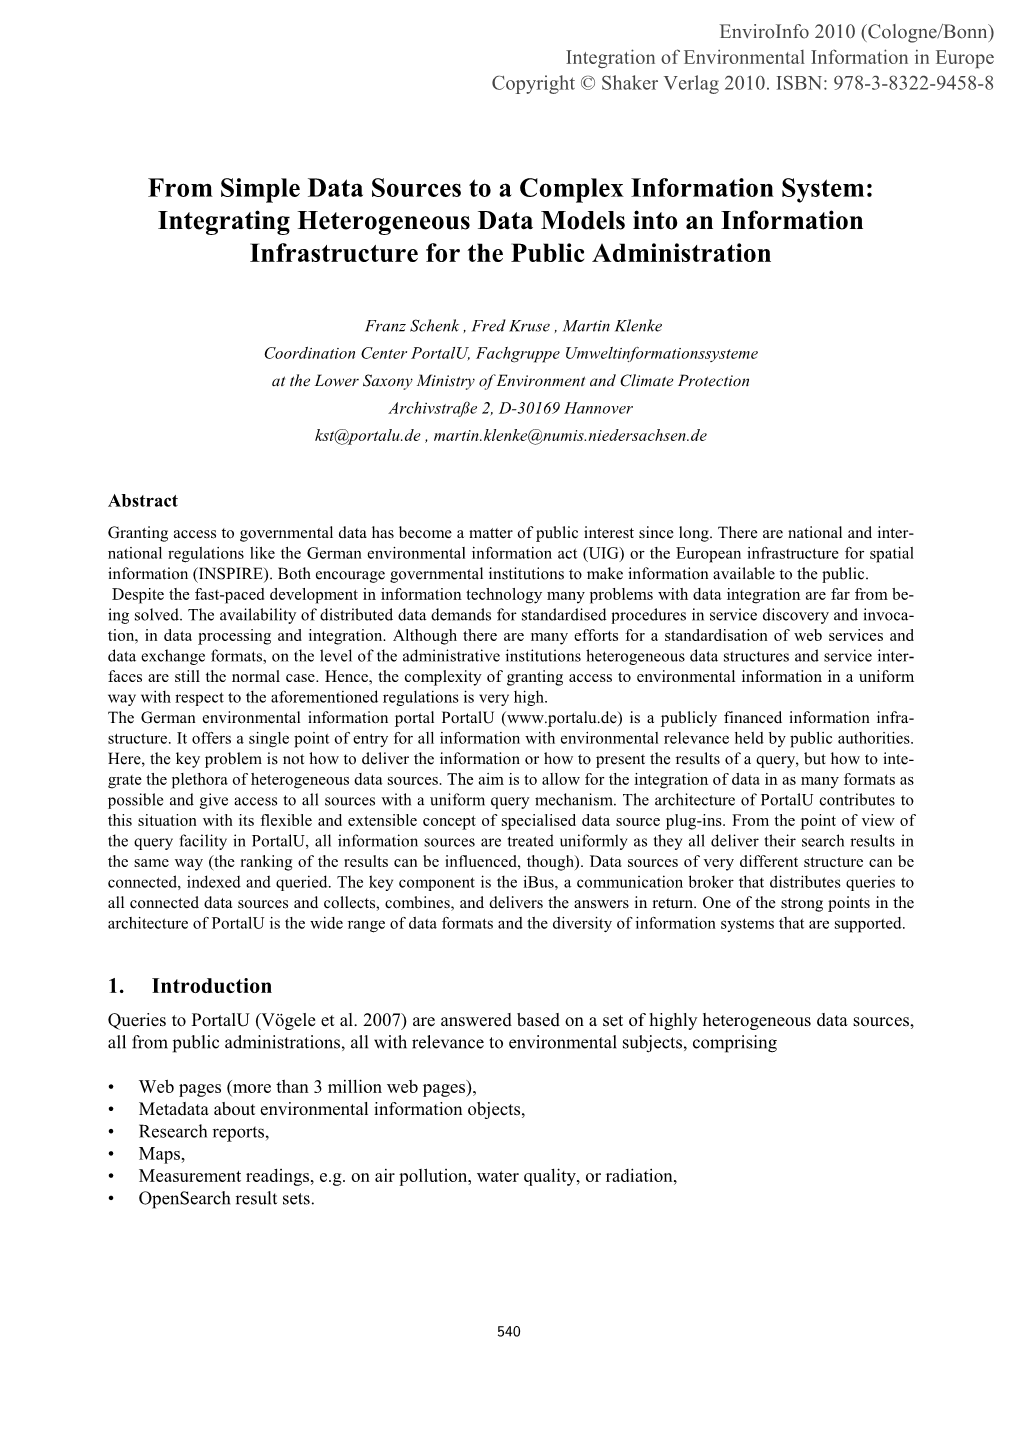 From Simple Data Sources to a Complex Information System: Integrating Heterogeneous Data Models Into an Information Infrastructure for the Public Administration